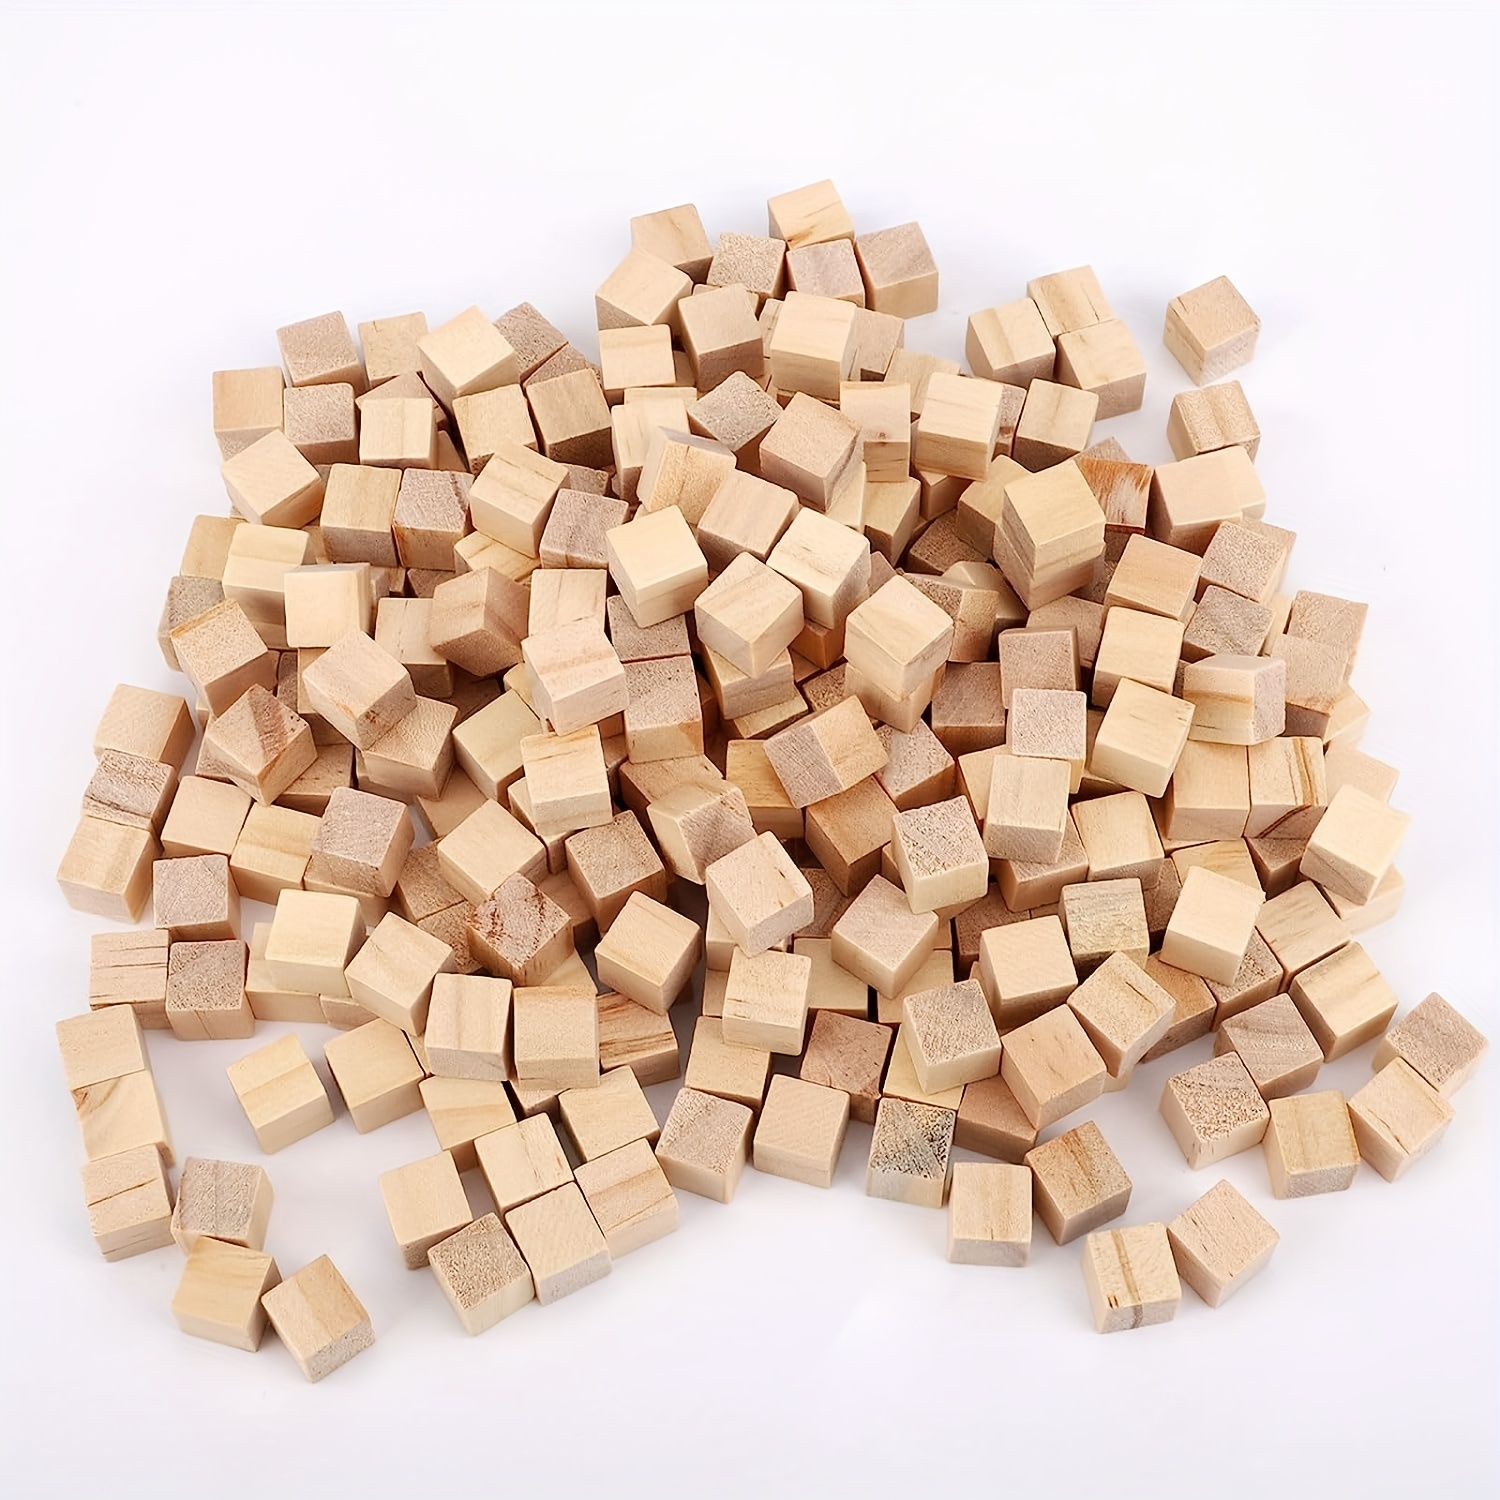 Large Carving Wood Blocks (20 Pack) 4 x 1 x 1 Inches Unfinished